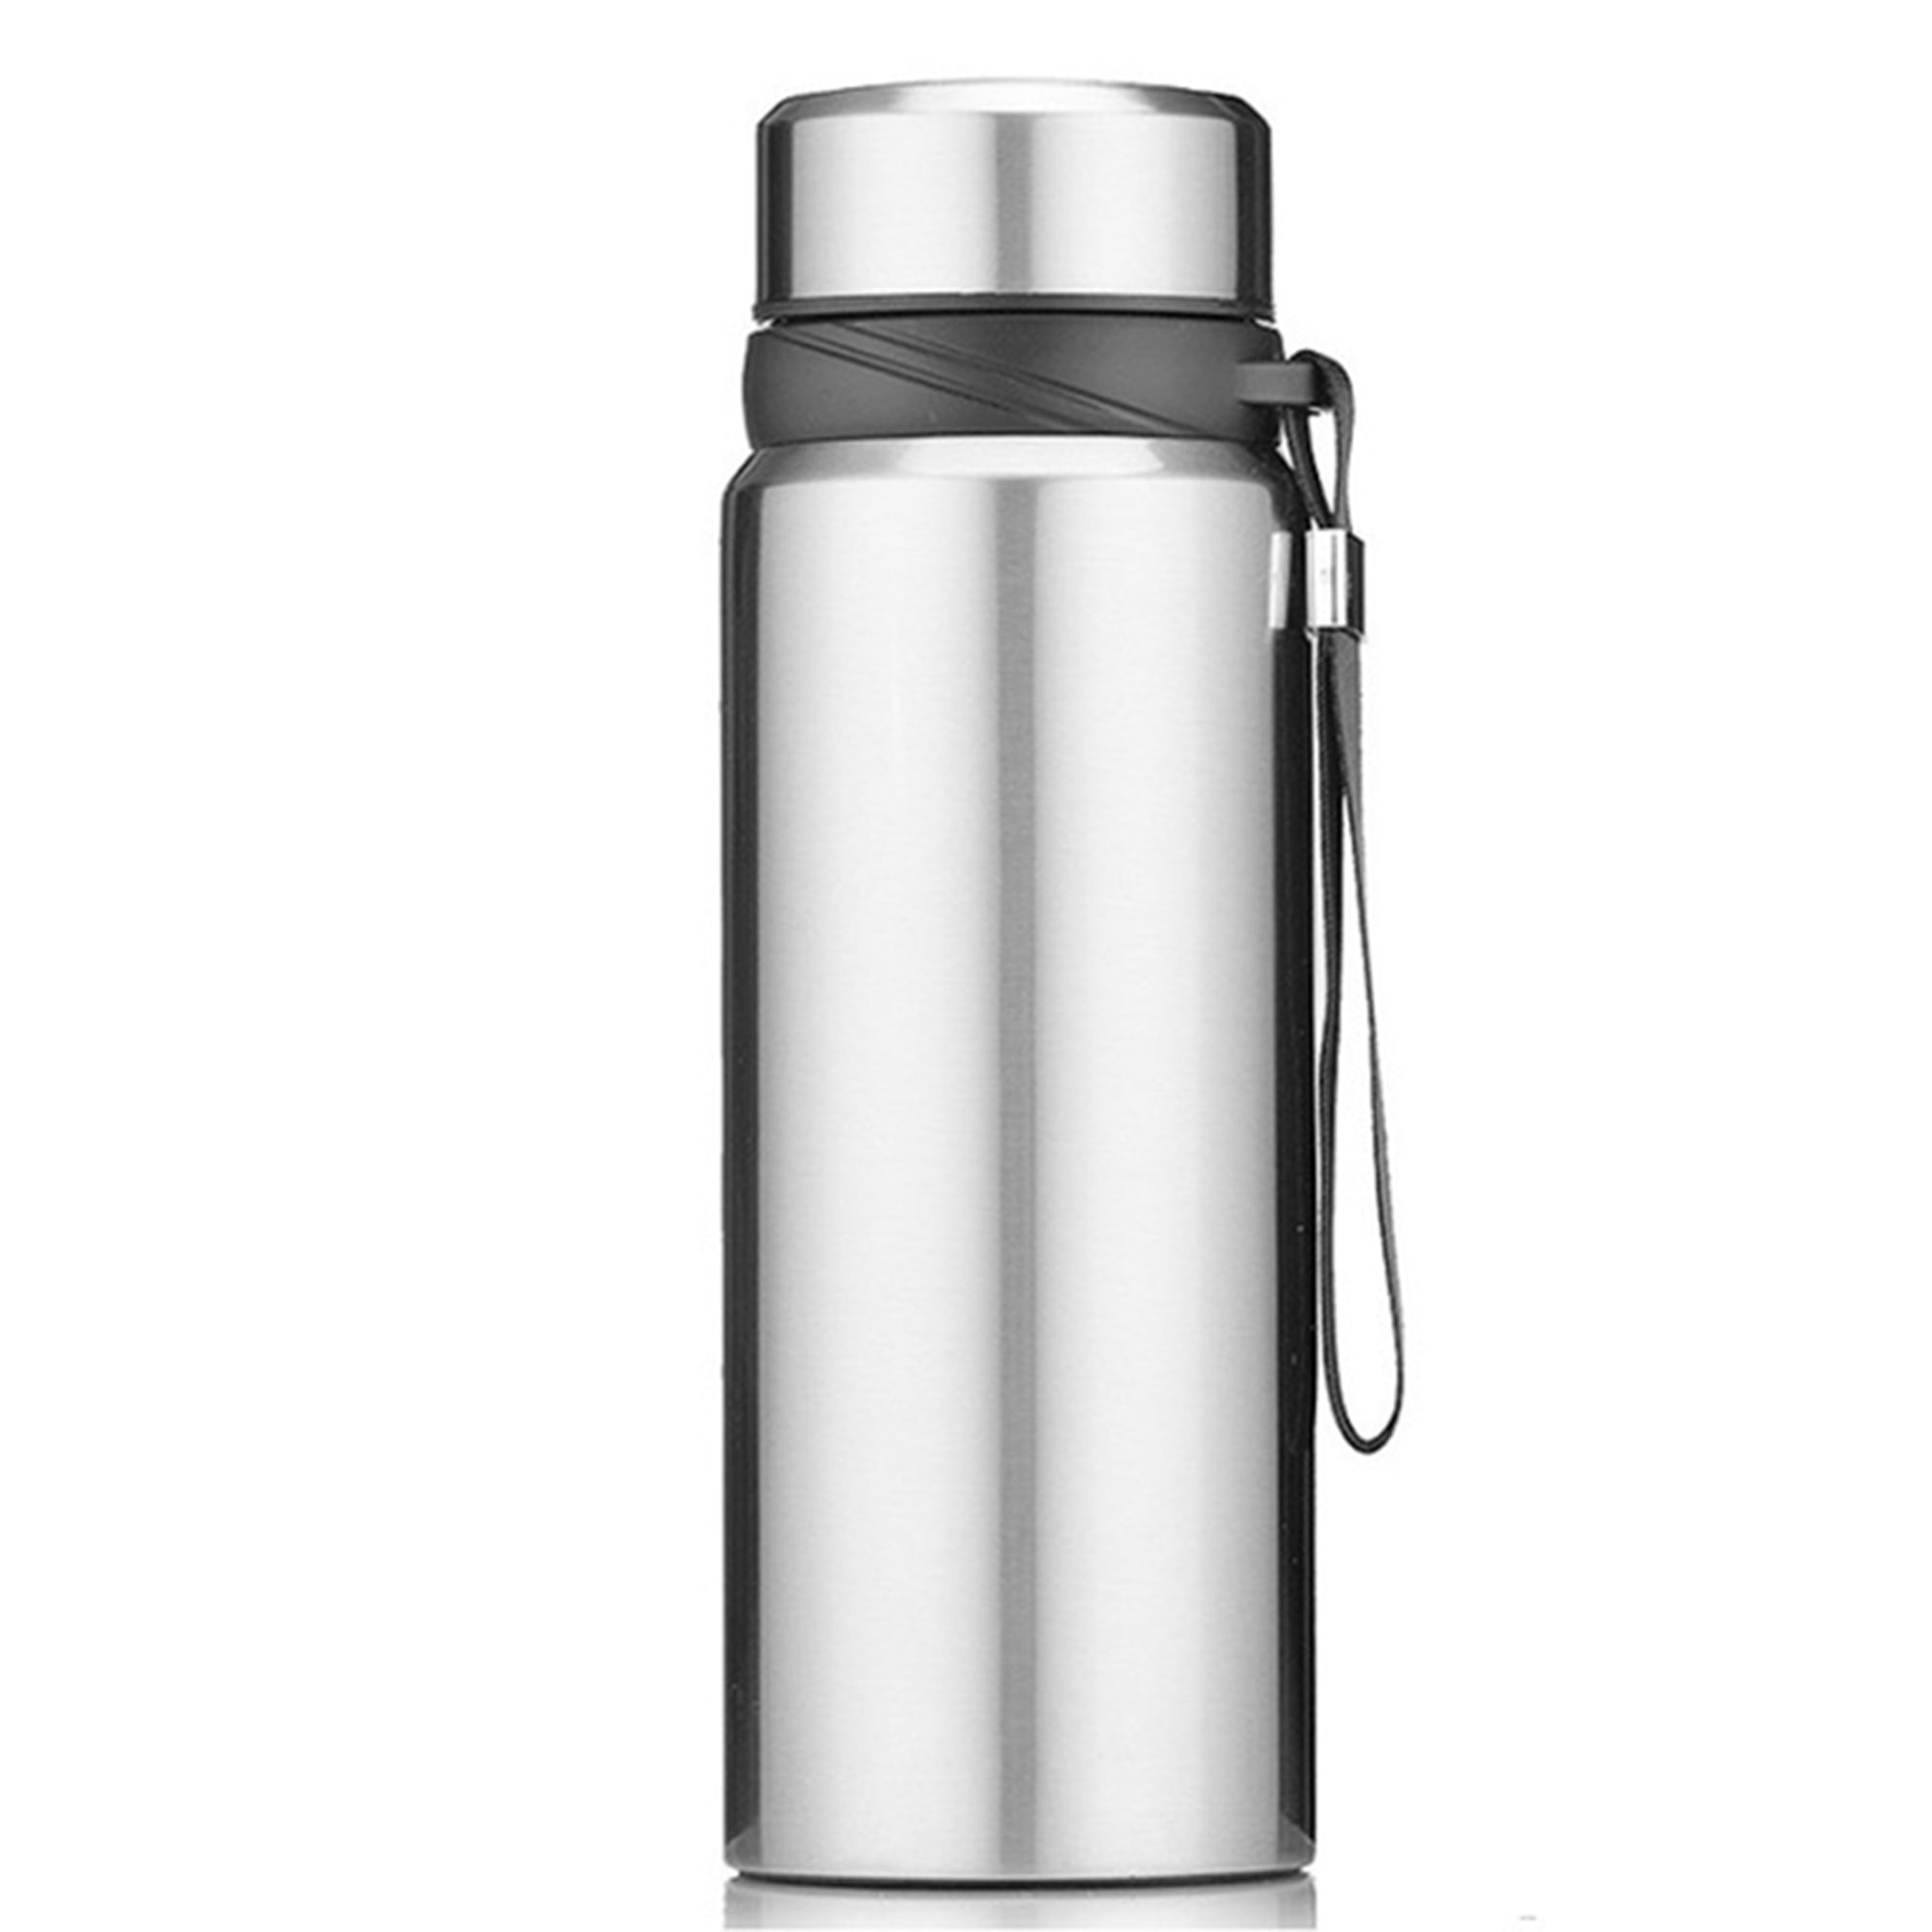 Thermos Stainless Steel Water Bottle Double Wall Vacuum Insulated Sports Gym Metal Flask 